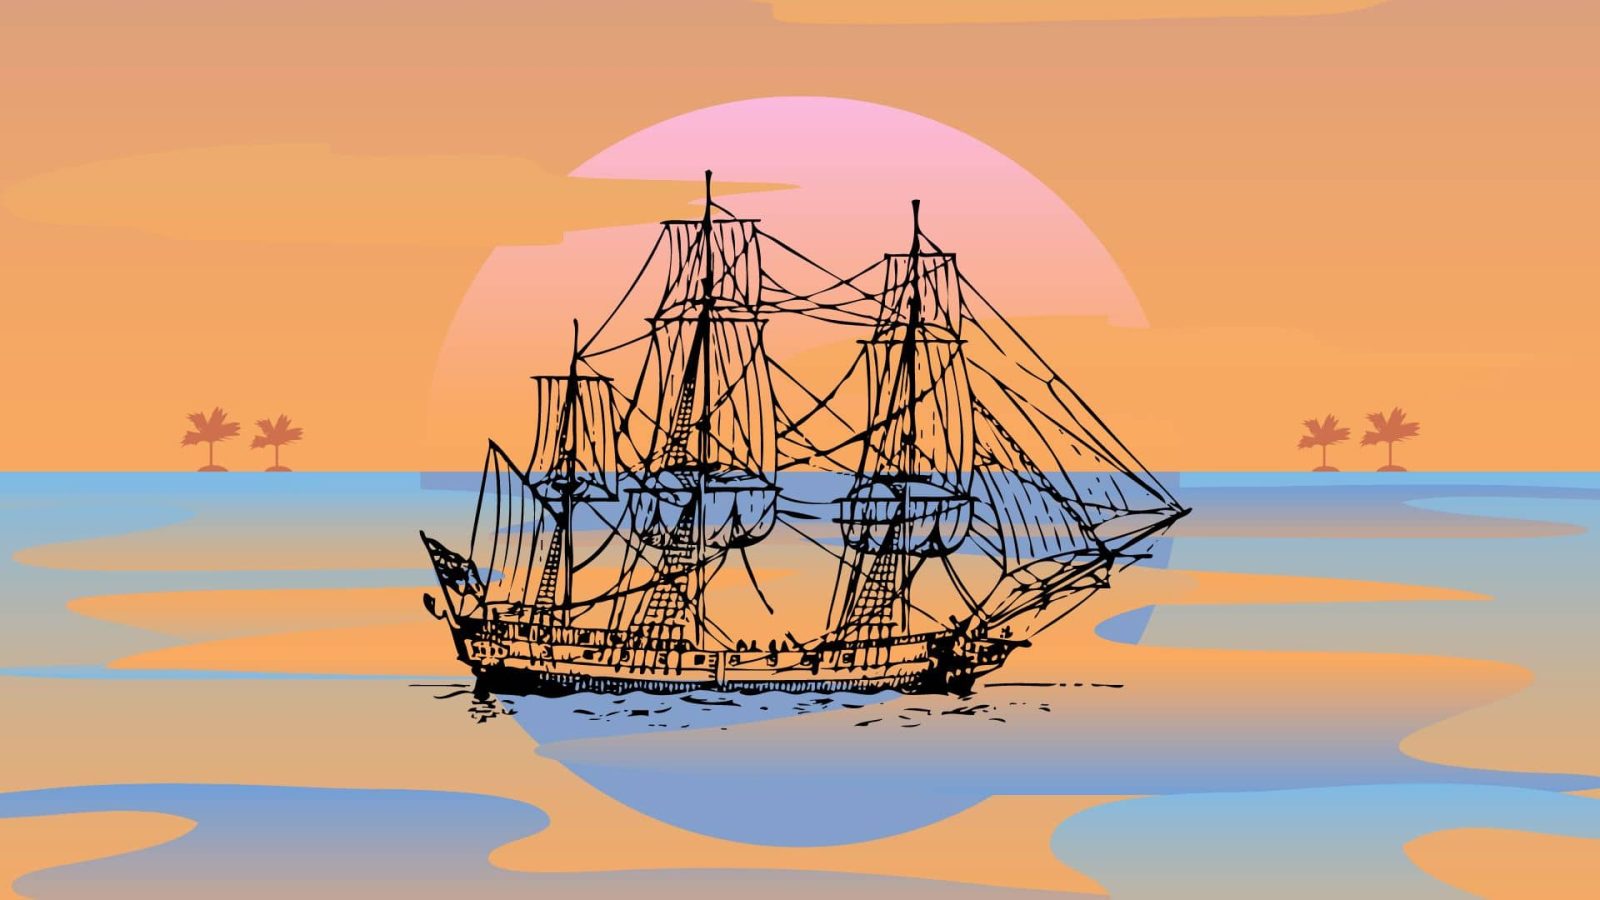 A pirate ship sketch in front of an orange sunset reflecting against the blue water